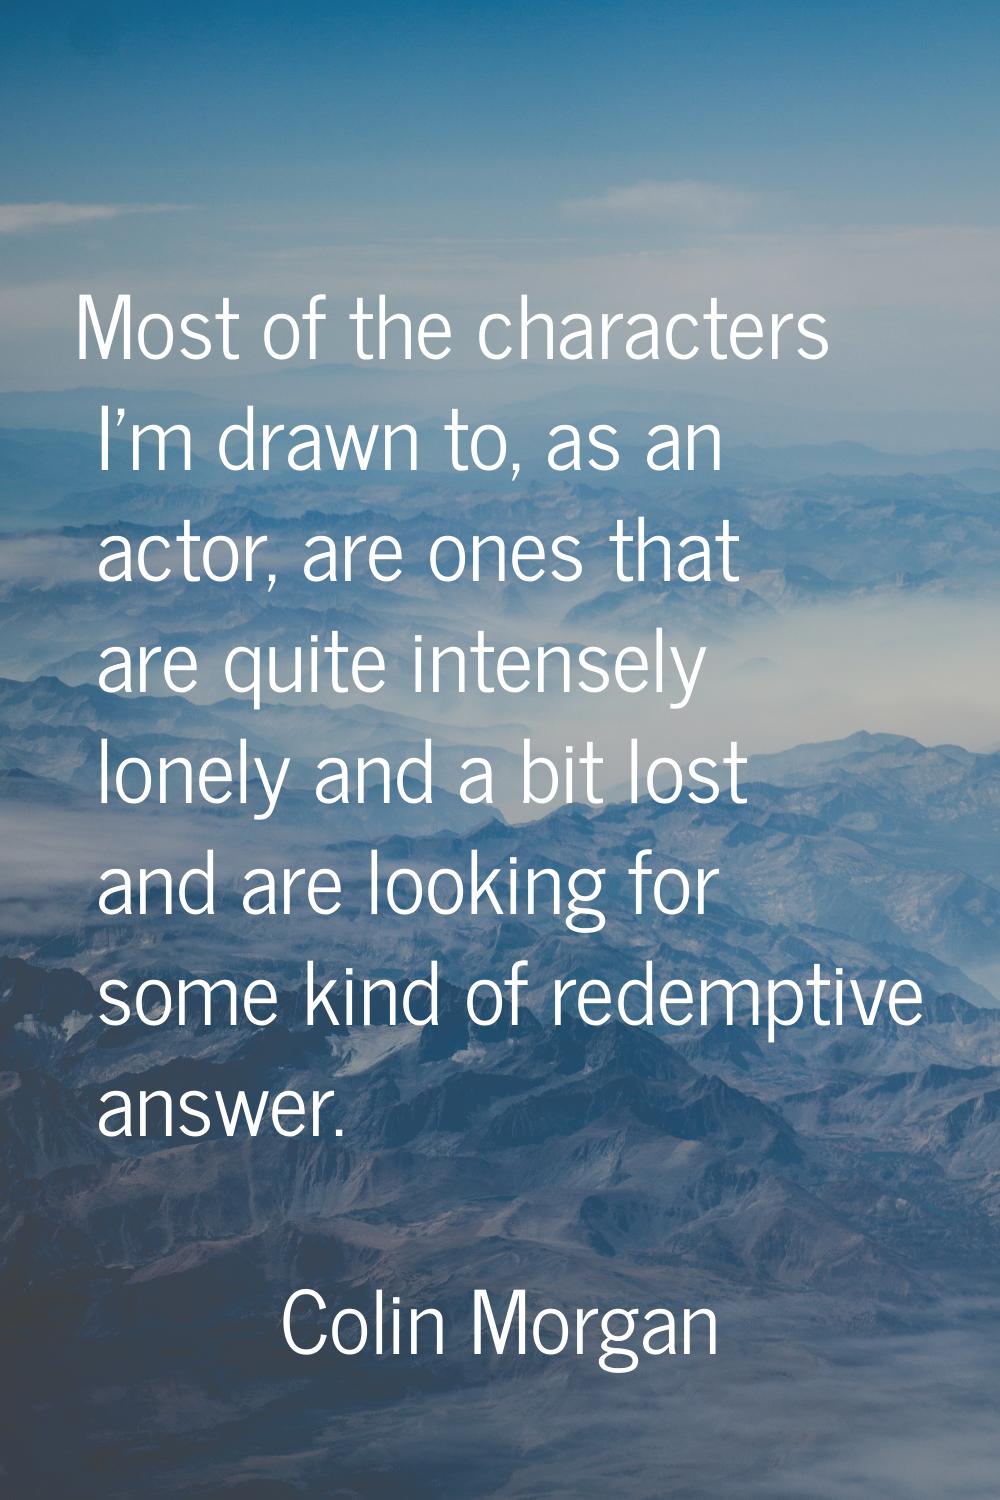 Most of the characters I'm drawn to, as an actor, are ones that are quite intensely lonely and a bi